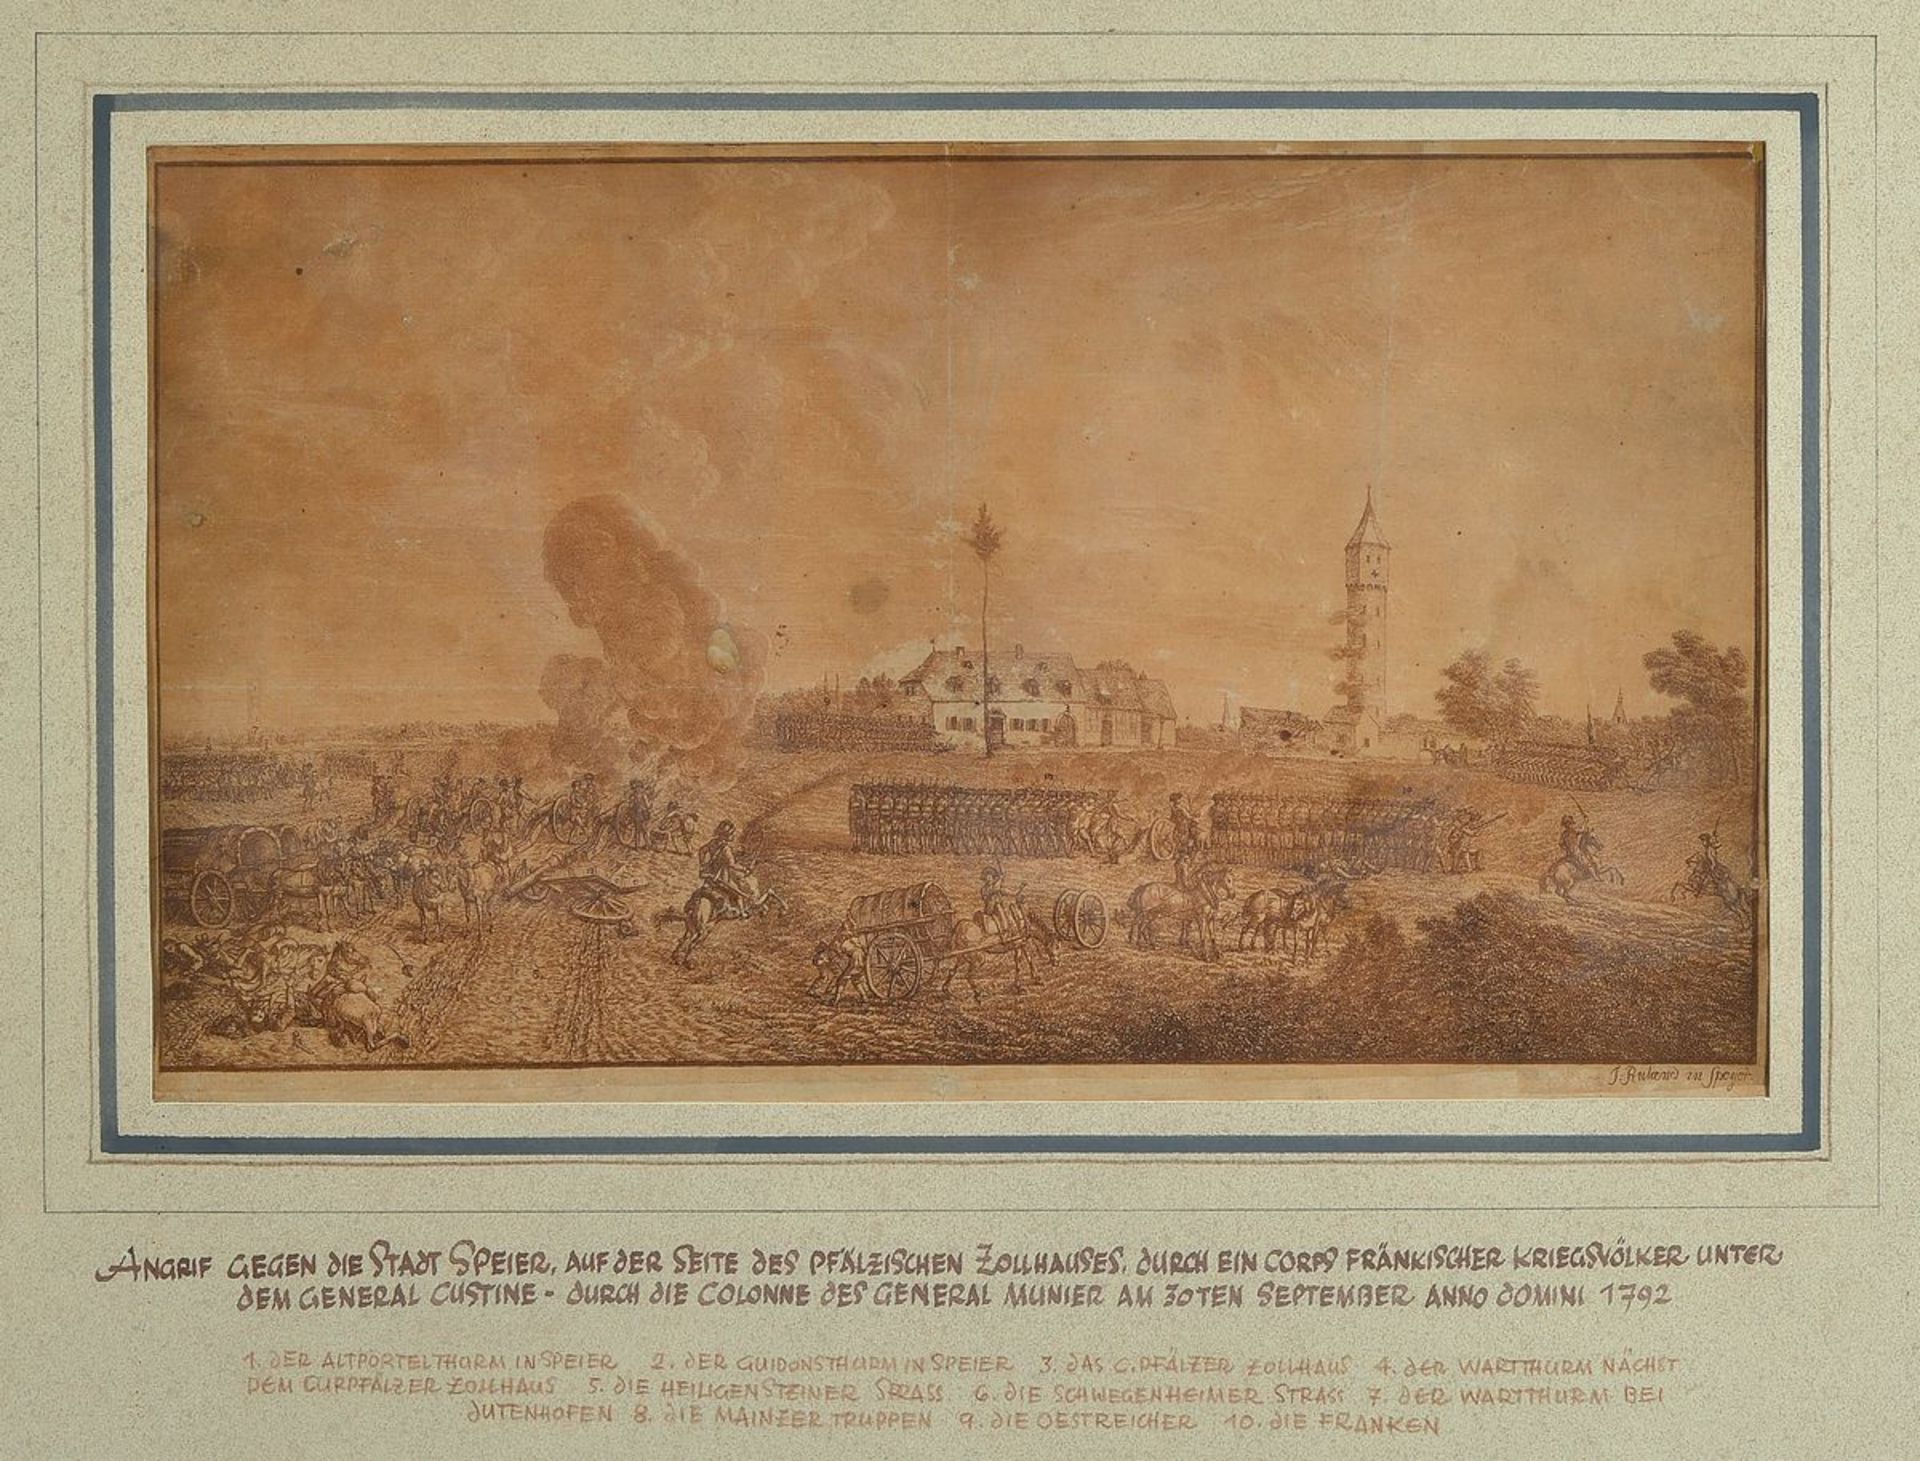 Johannes Ruland, 1744-1830 Speyer, pen and inkdrawing in sepia: Attack against the city of Speyer,